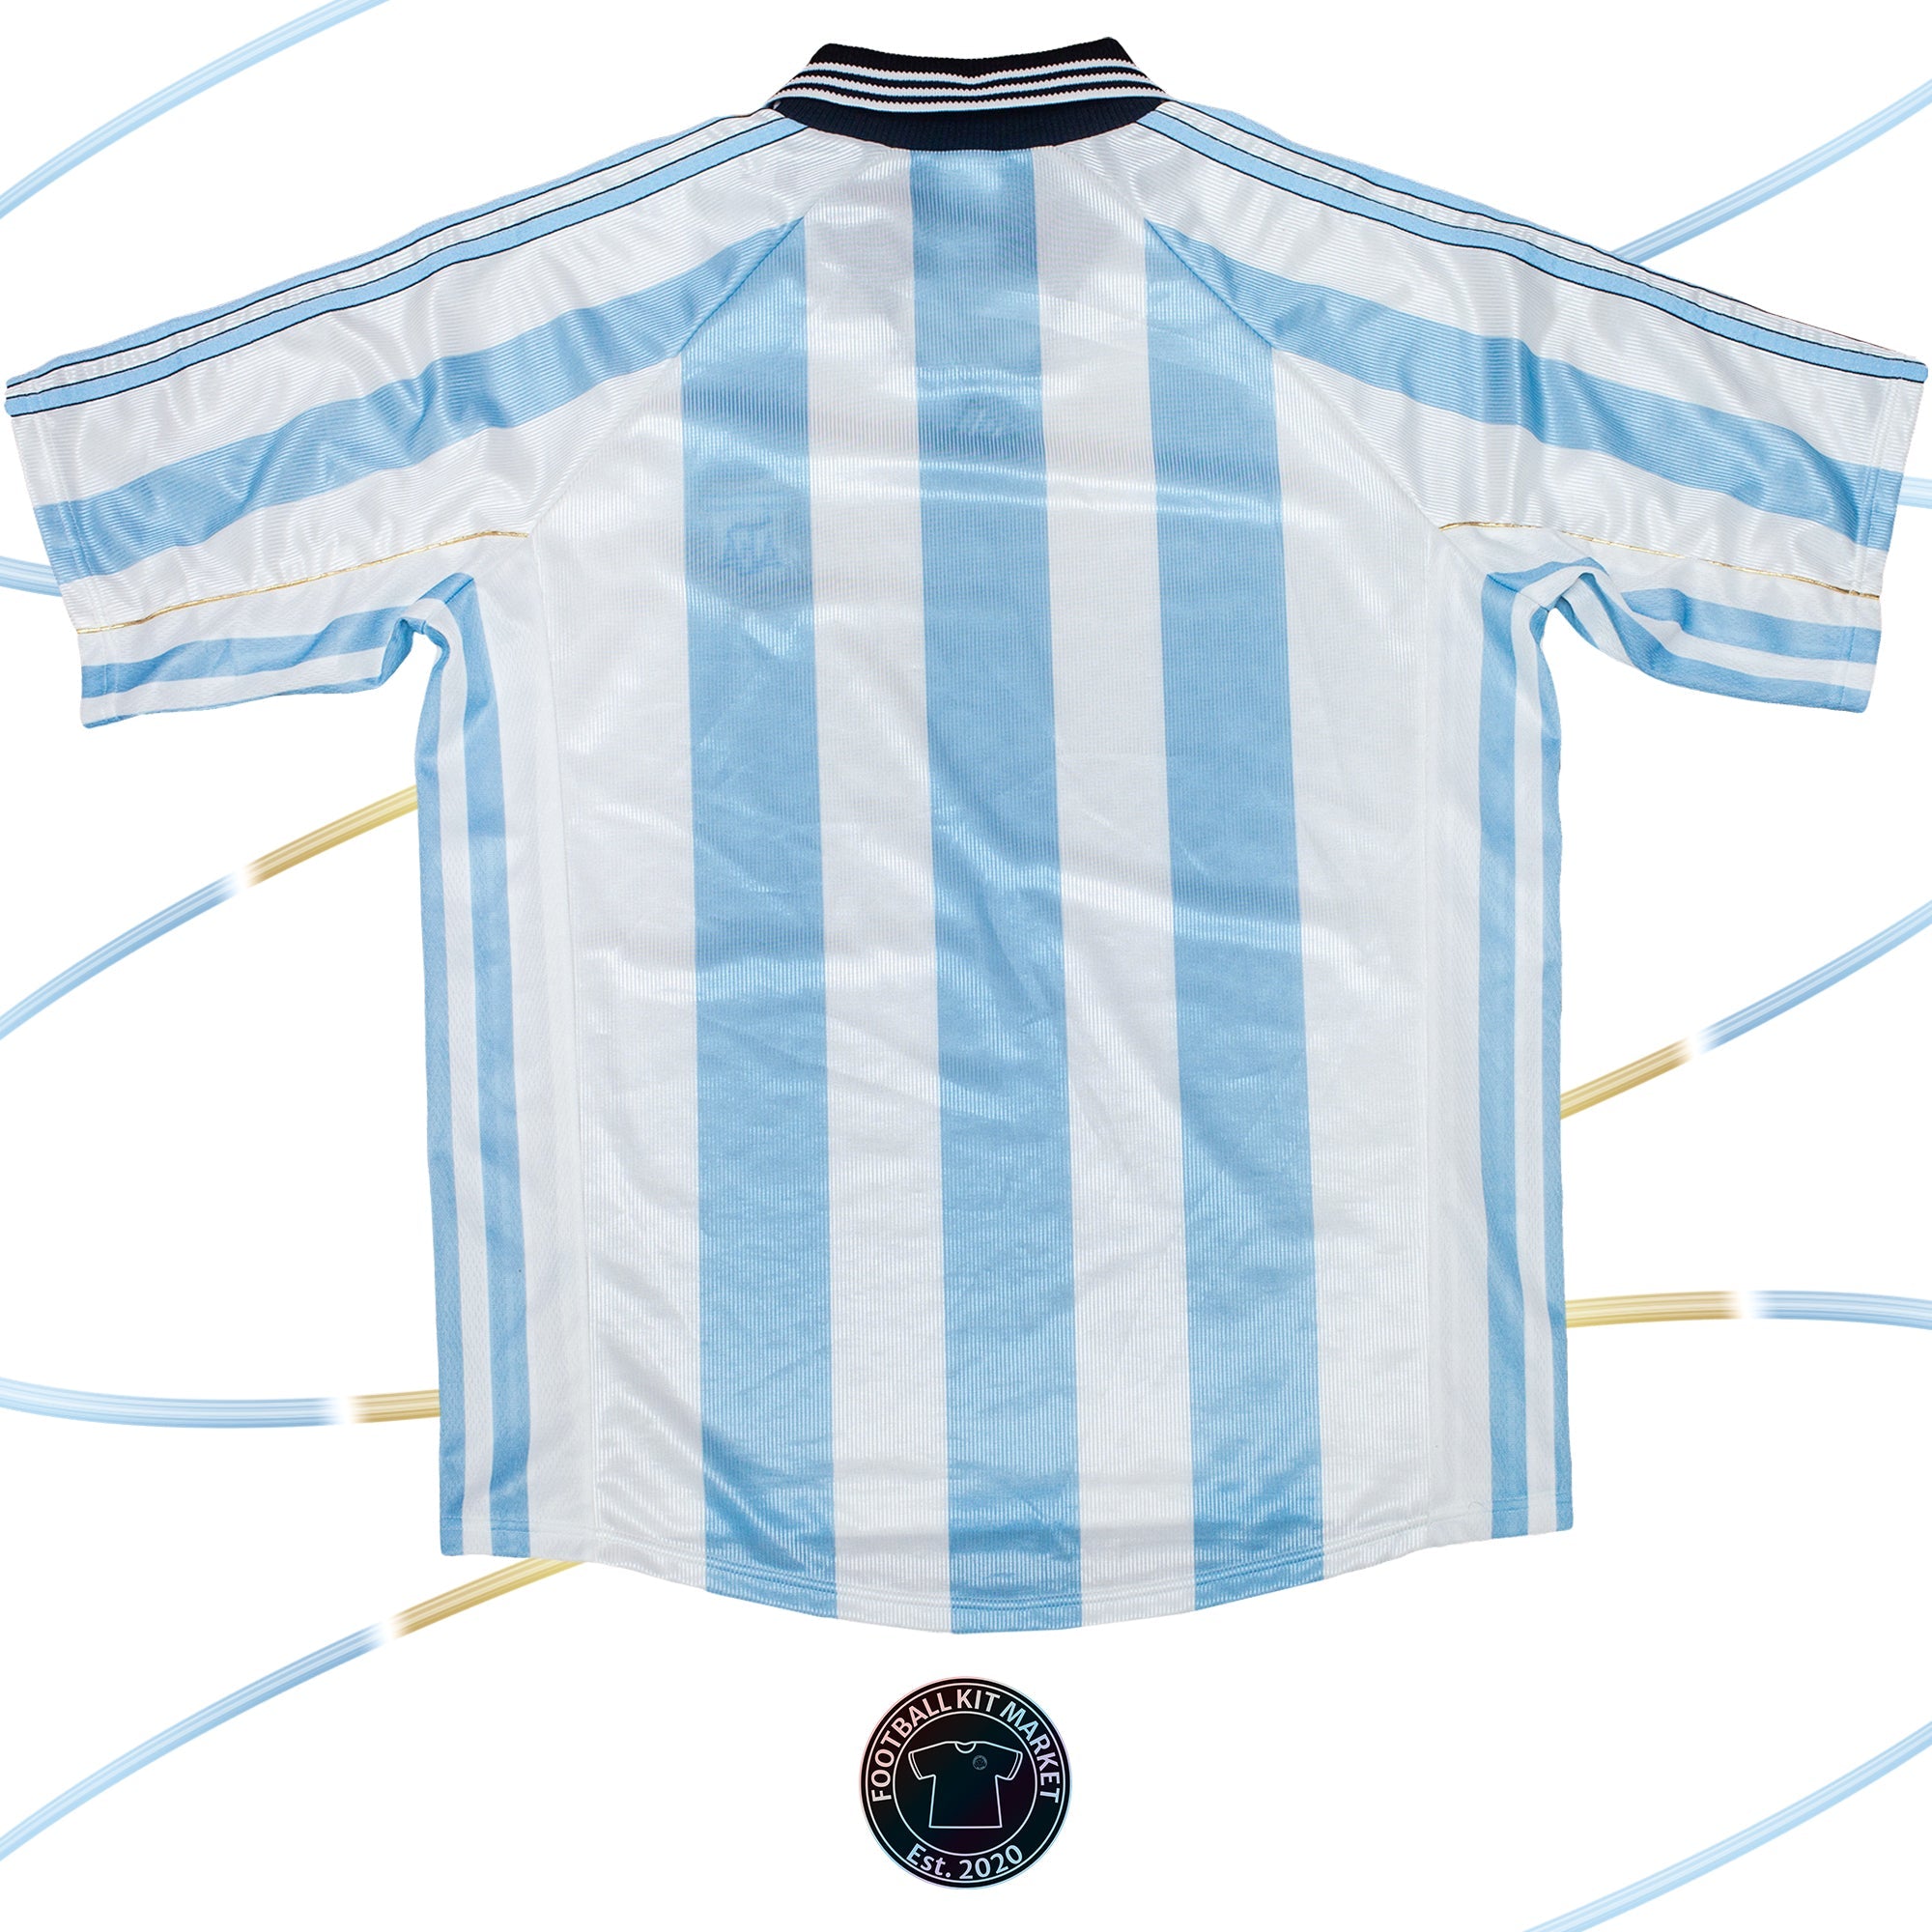 Genuine ARGENTINA Home Shirt (1998-1999) - ADIDAS (L) - Product Image from Football Kit Market